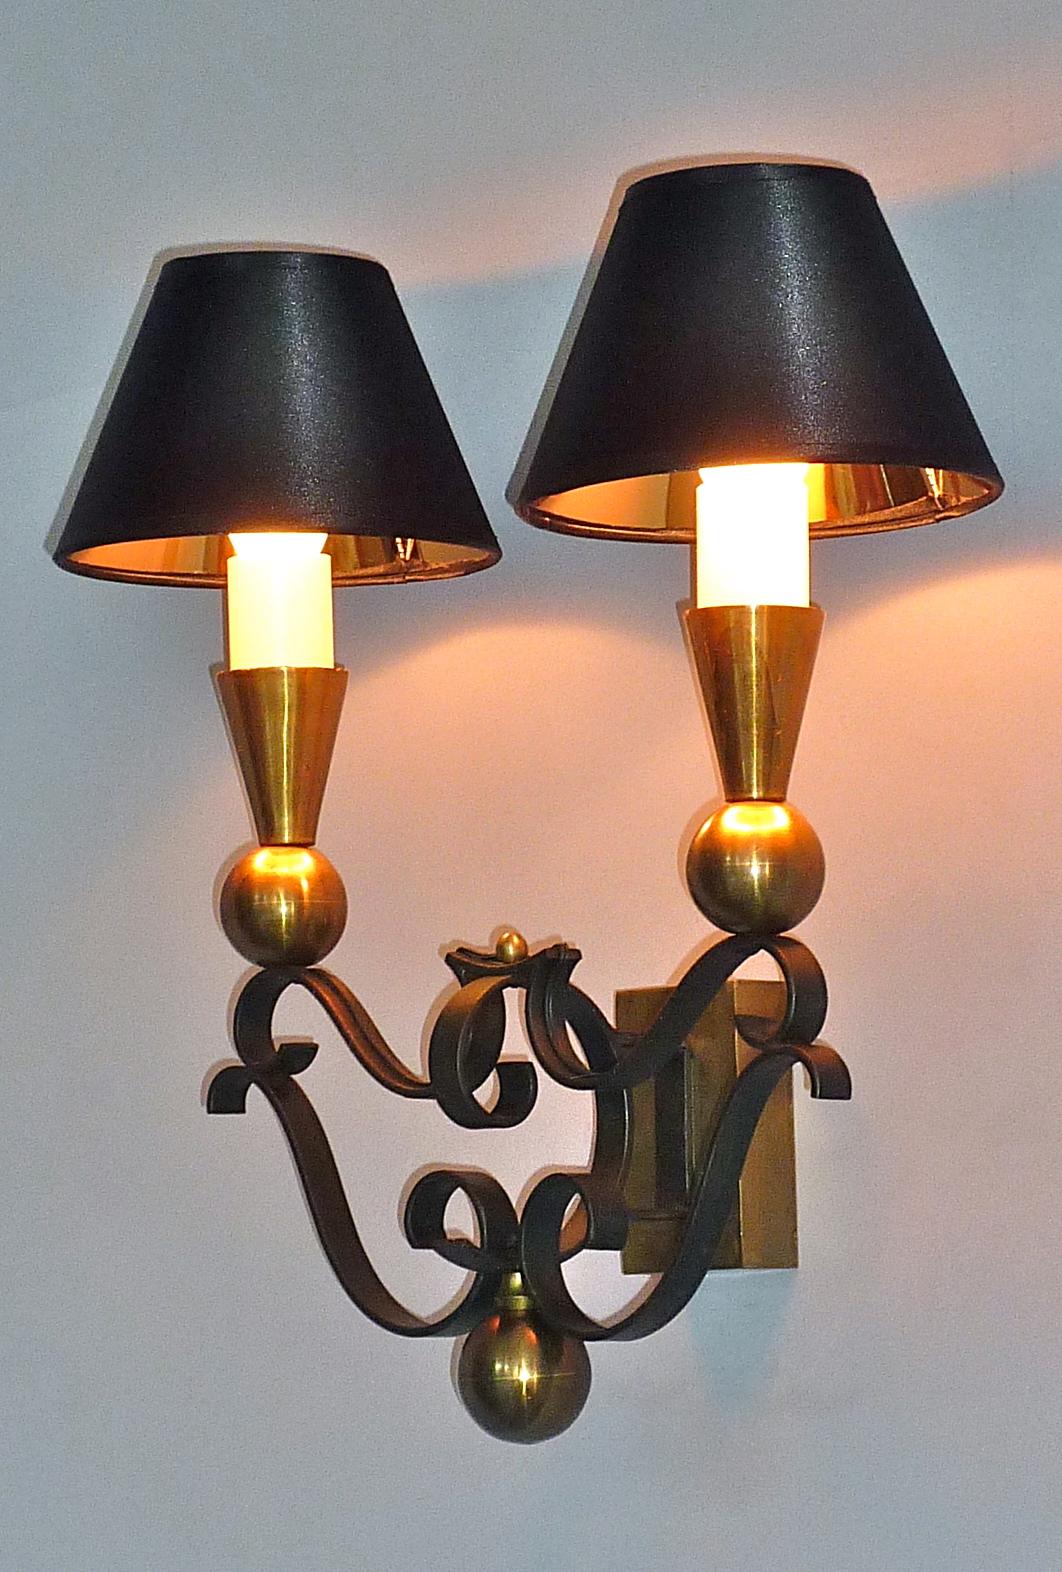 3 Rare Sconces Poillerat Adnet Style Black Forged Iron Brass Gold France 1950s For Sale 12